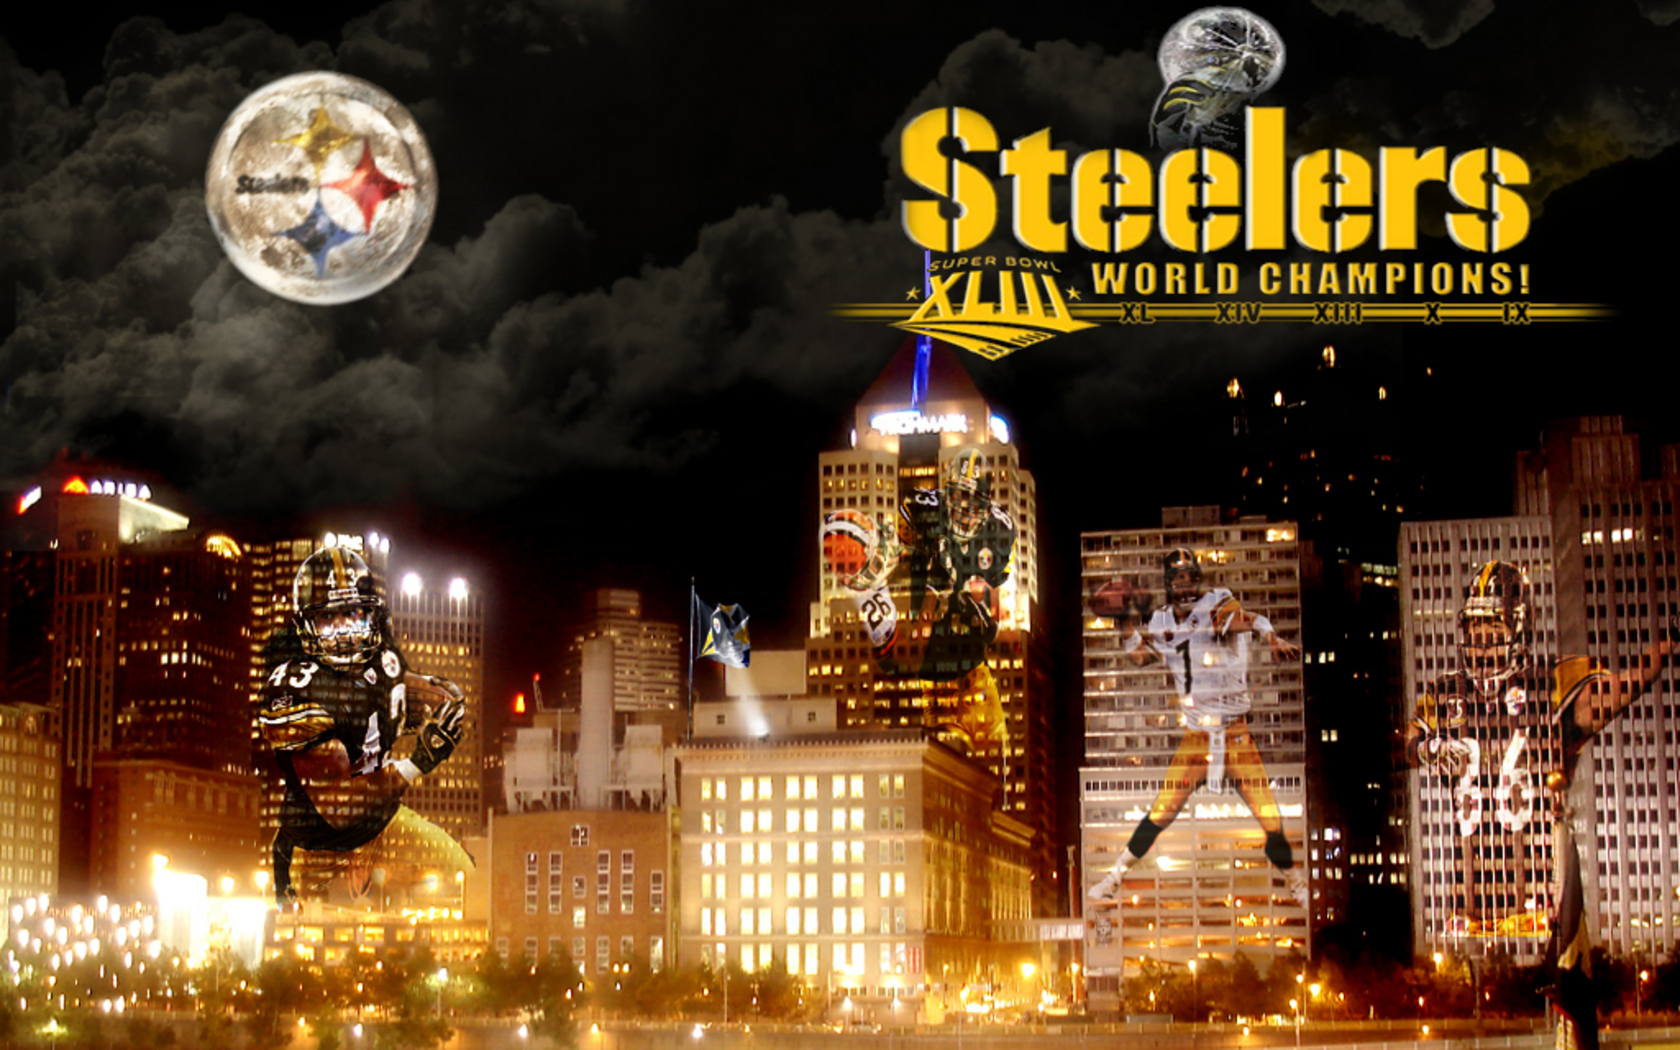 More Pittsburgh Steelers wallpapers